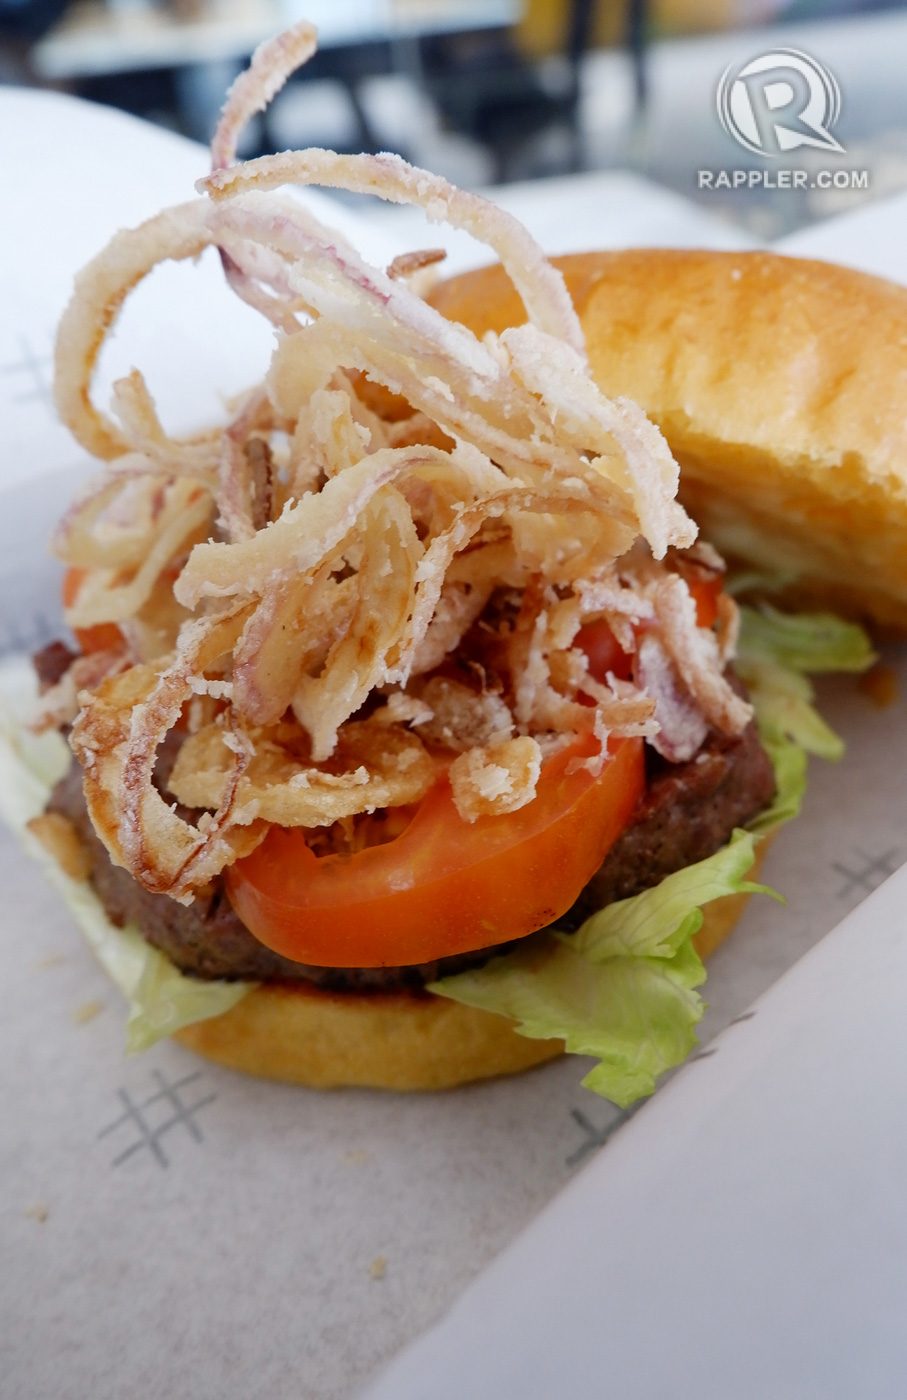 SIGNATURE DISH. The Todd English Burger with crispy onions on a house ground beef patty, served with T.E. sauce. 